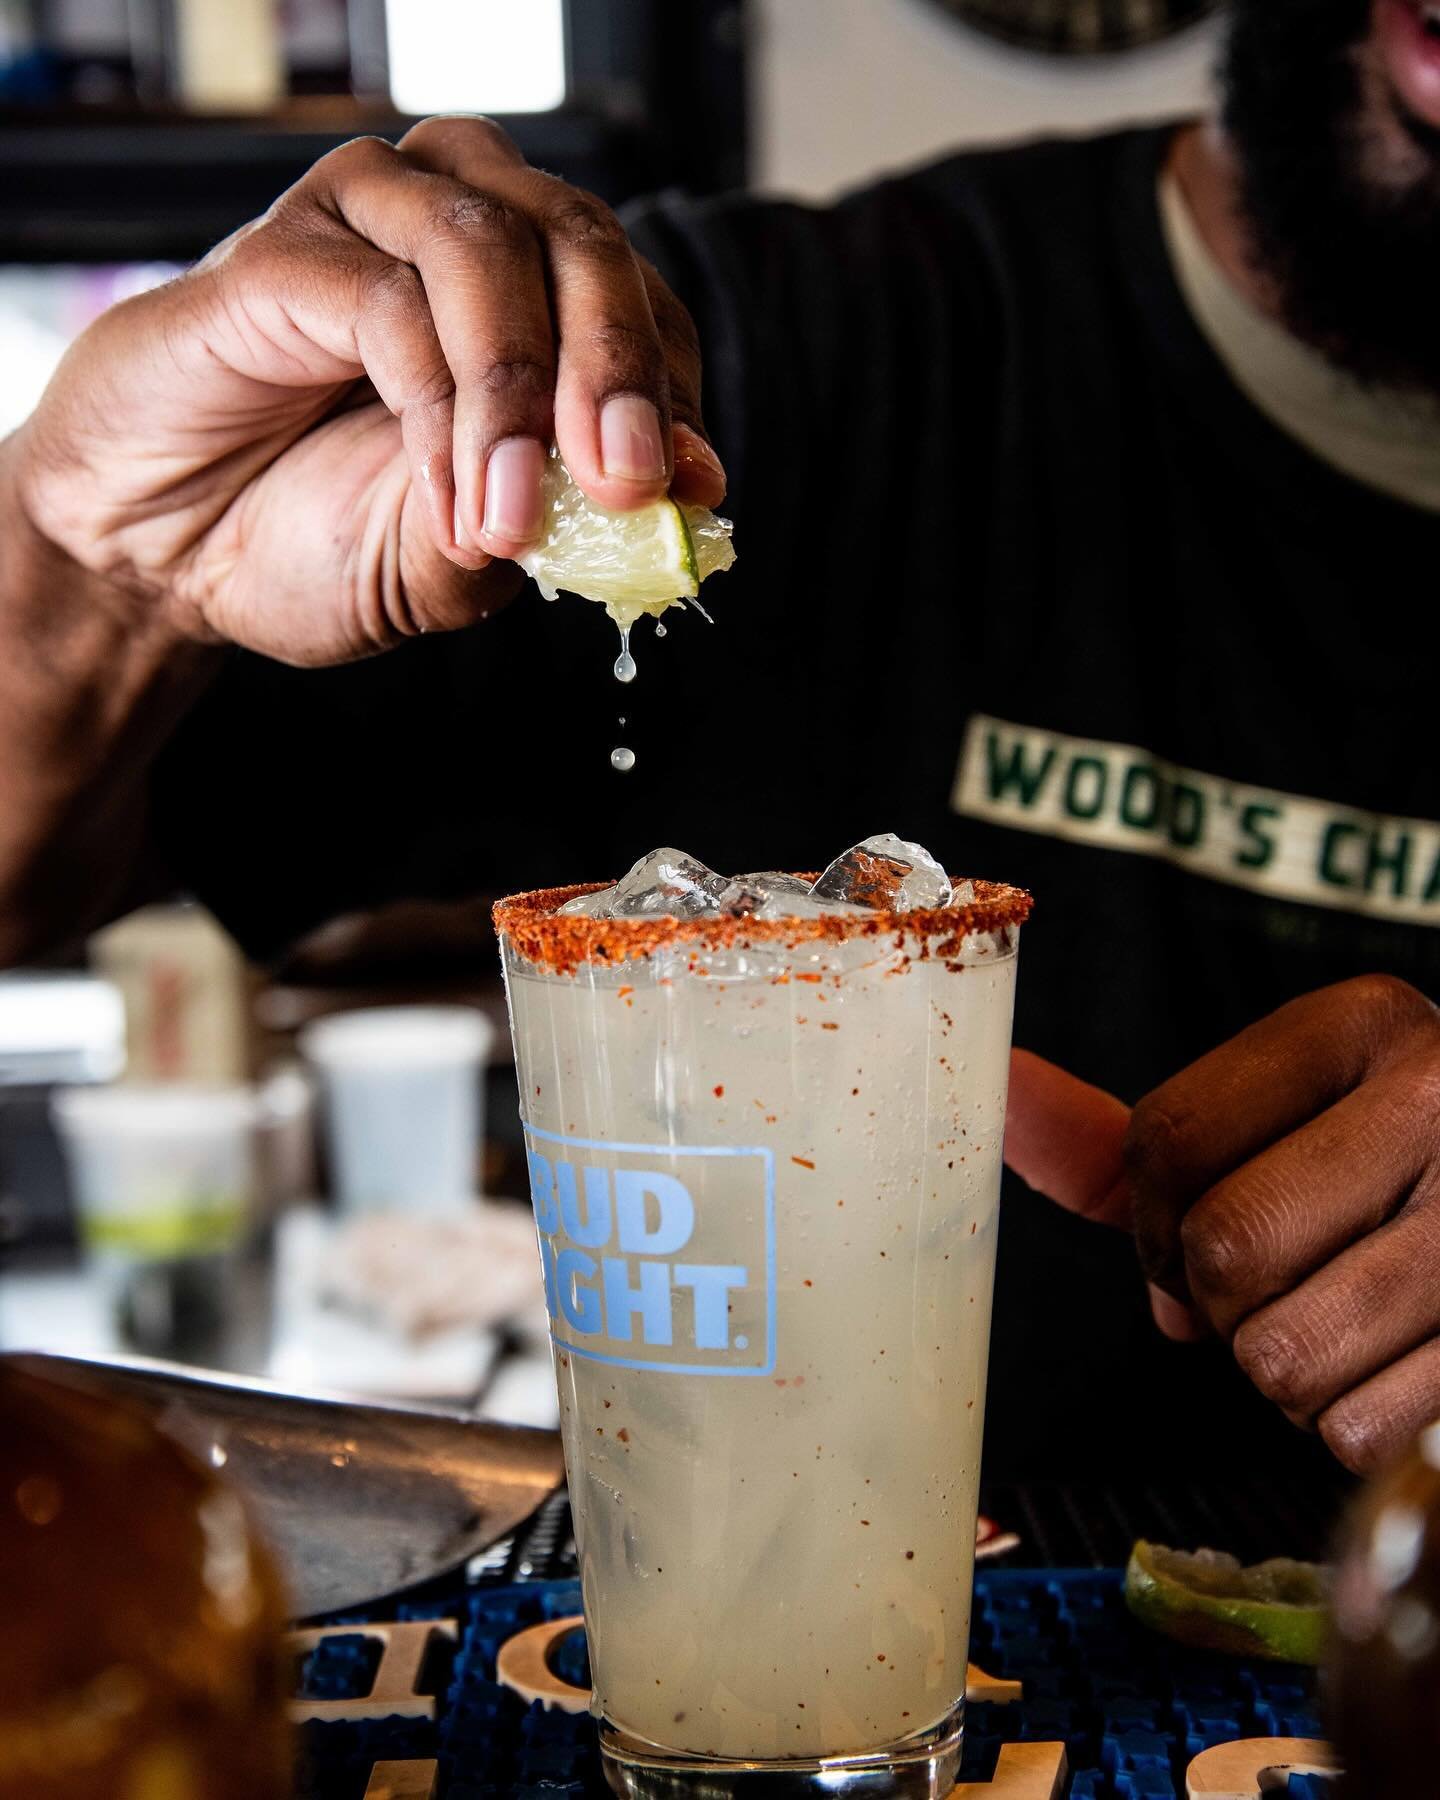 We&rsquo;re ready for Cinco de Mayo! You can&rsquo;t go wrong with our Classic Margarita or Margarita Boozy Slushie &mdash; but check out our Angry Rooster or Devil&rsquo;s Sunrise cocktails for variations on the theme, too! 📷: @grubfreaks for @summ